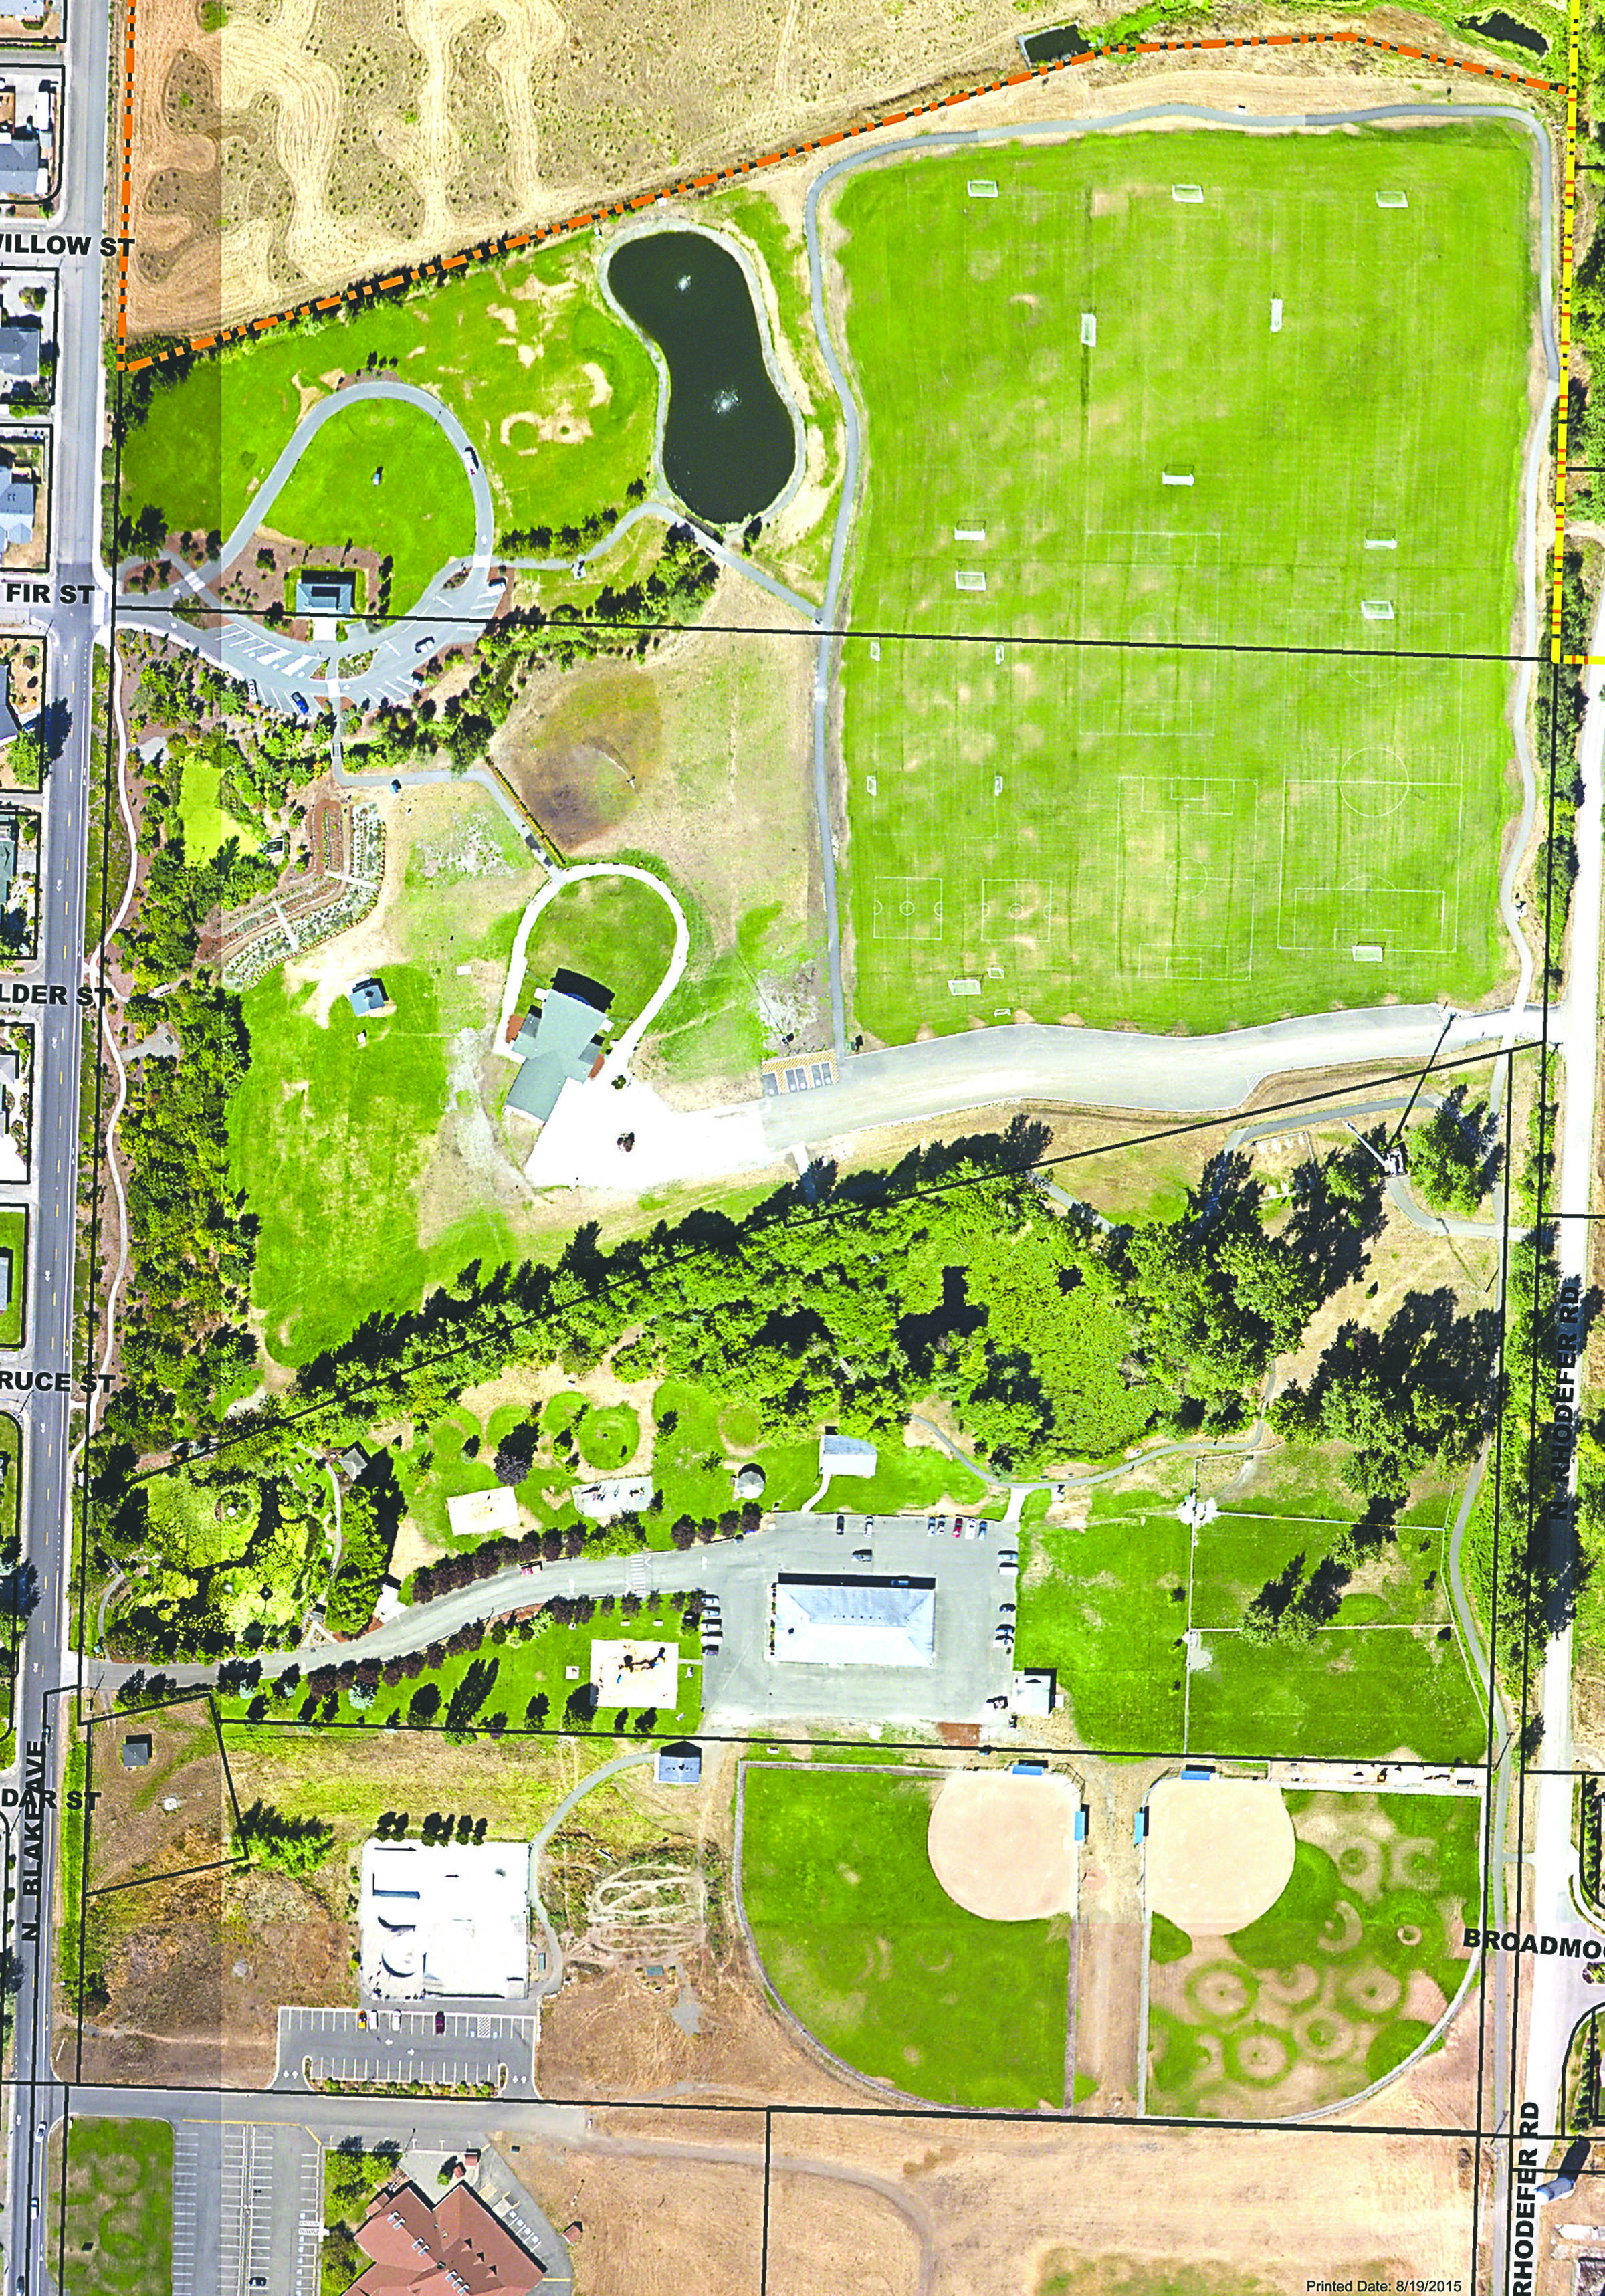 The city of Sequim has developed potential plans to construct additional parking to service the Albert Haller Playfields